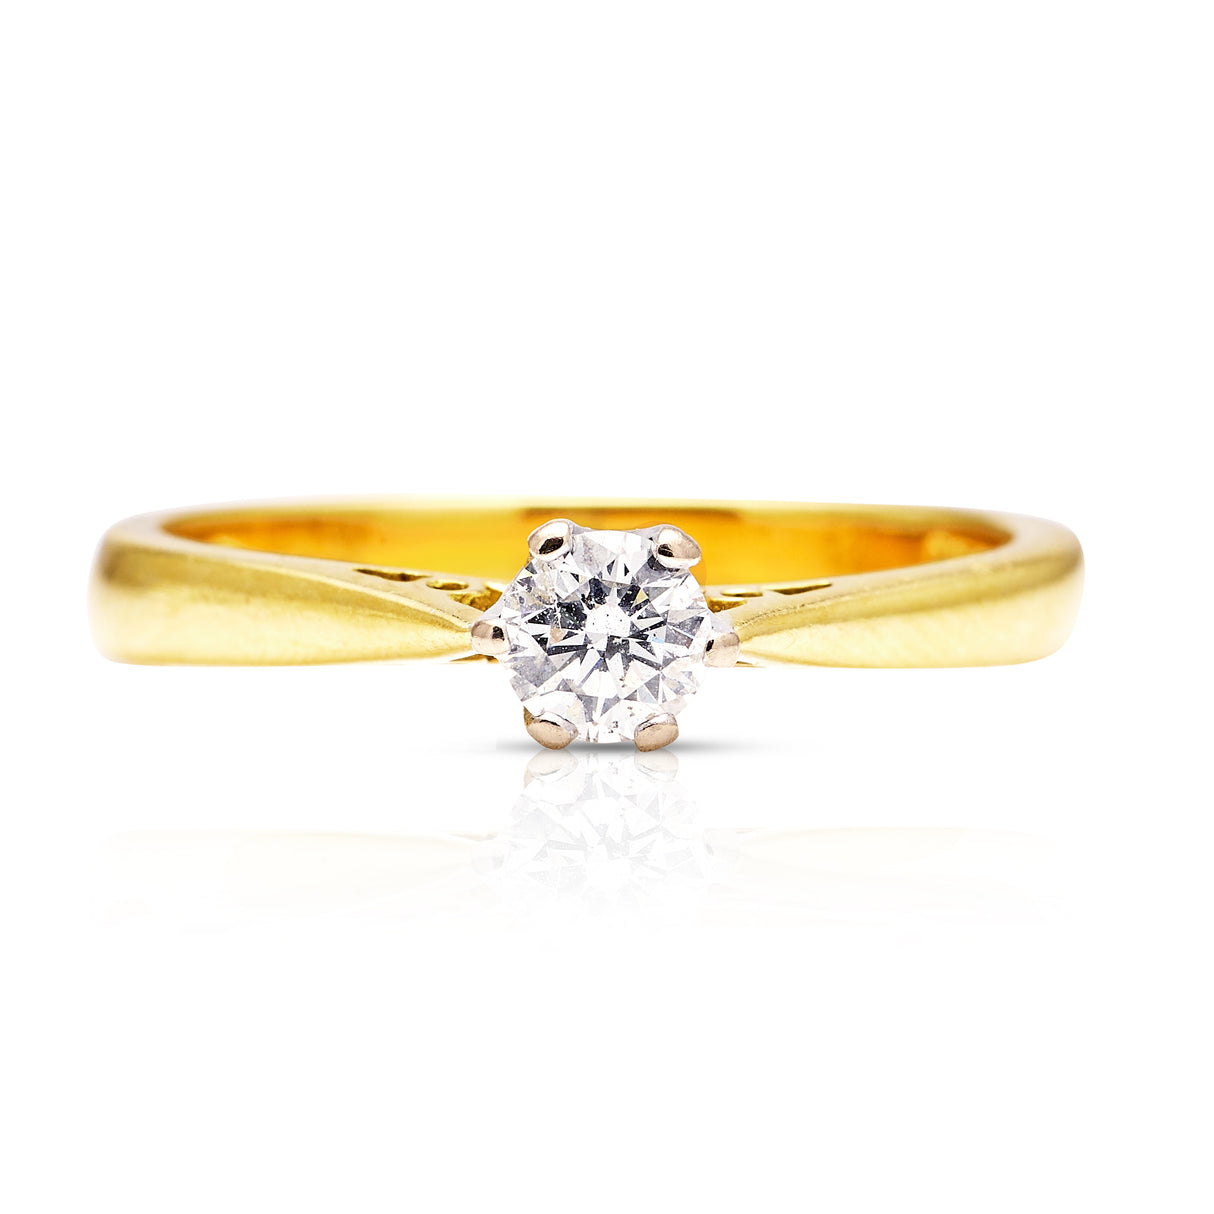 Contemporary, solitaire diamond engagement ring, 18ct yellow gold